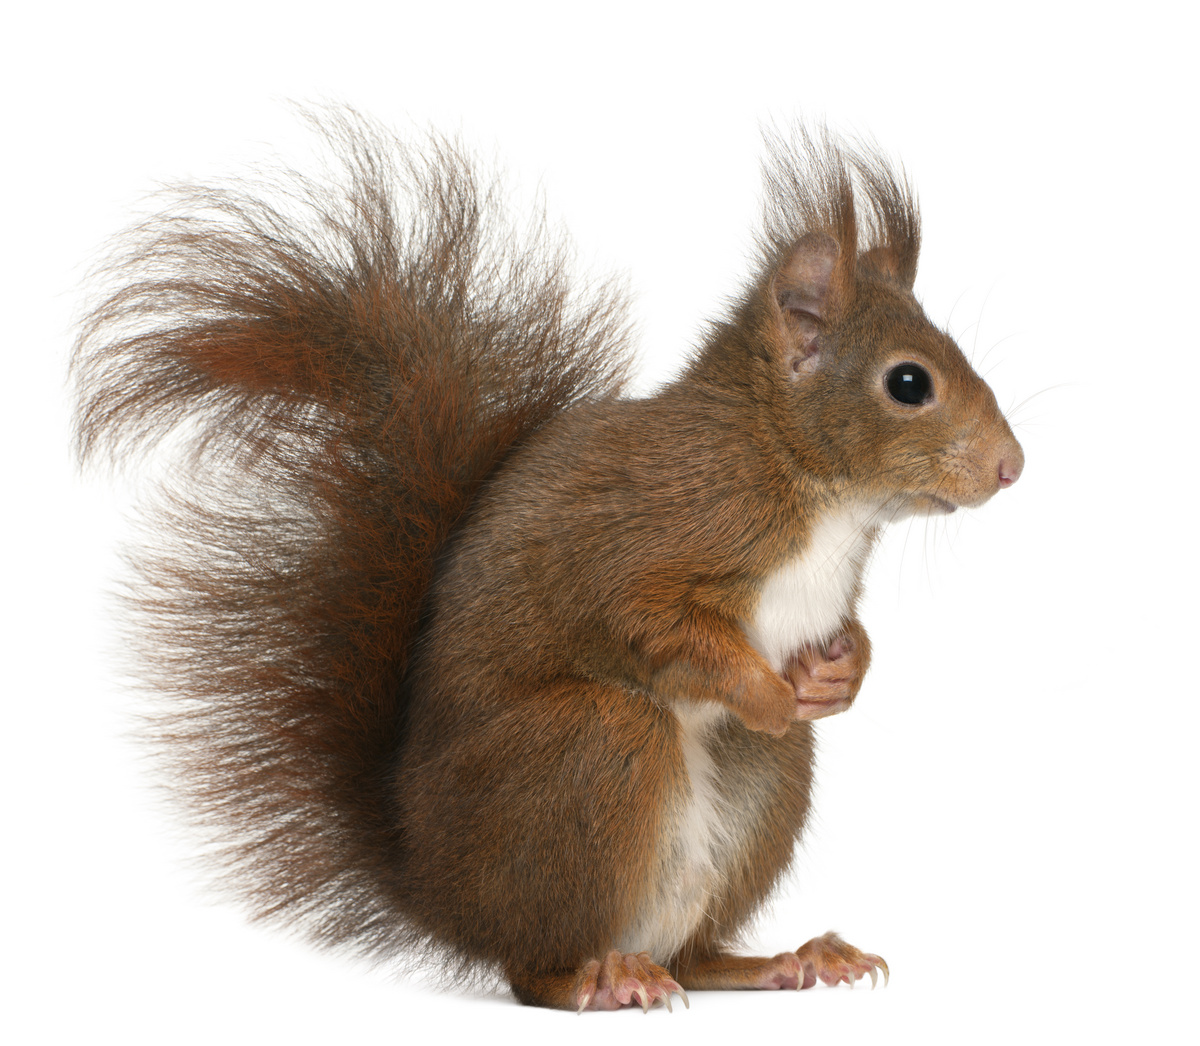 Eurasian red squirrel wallpapers HD | Download Free backgrounds